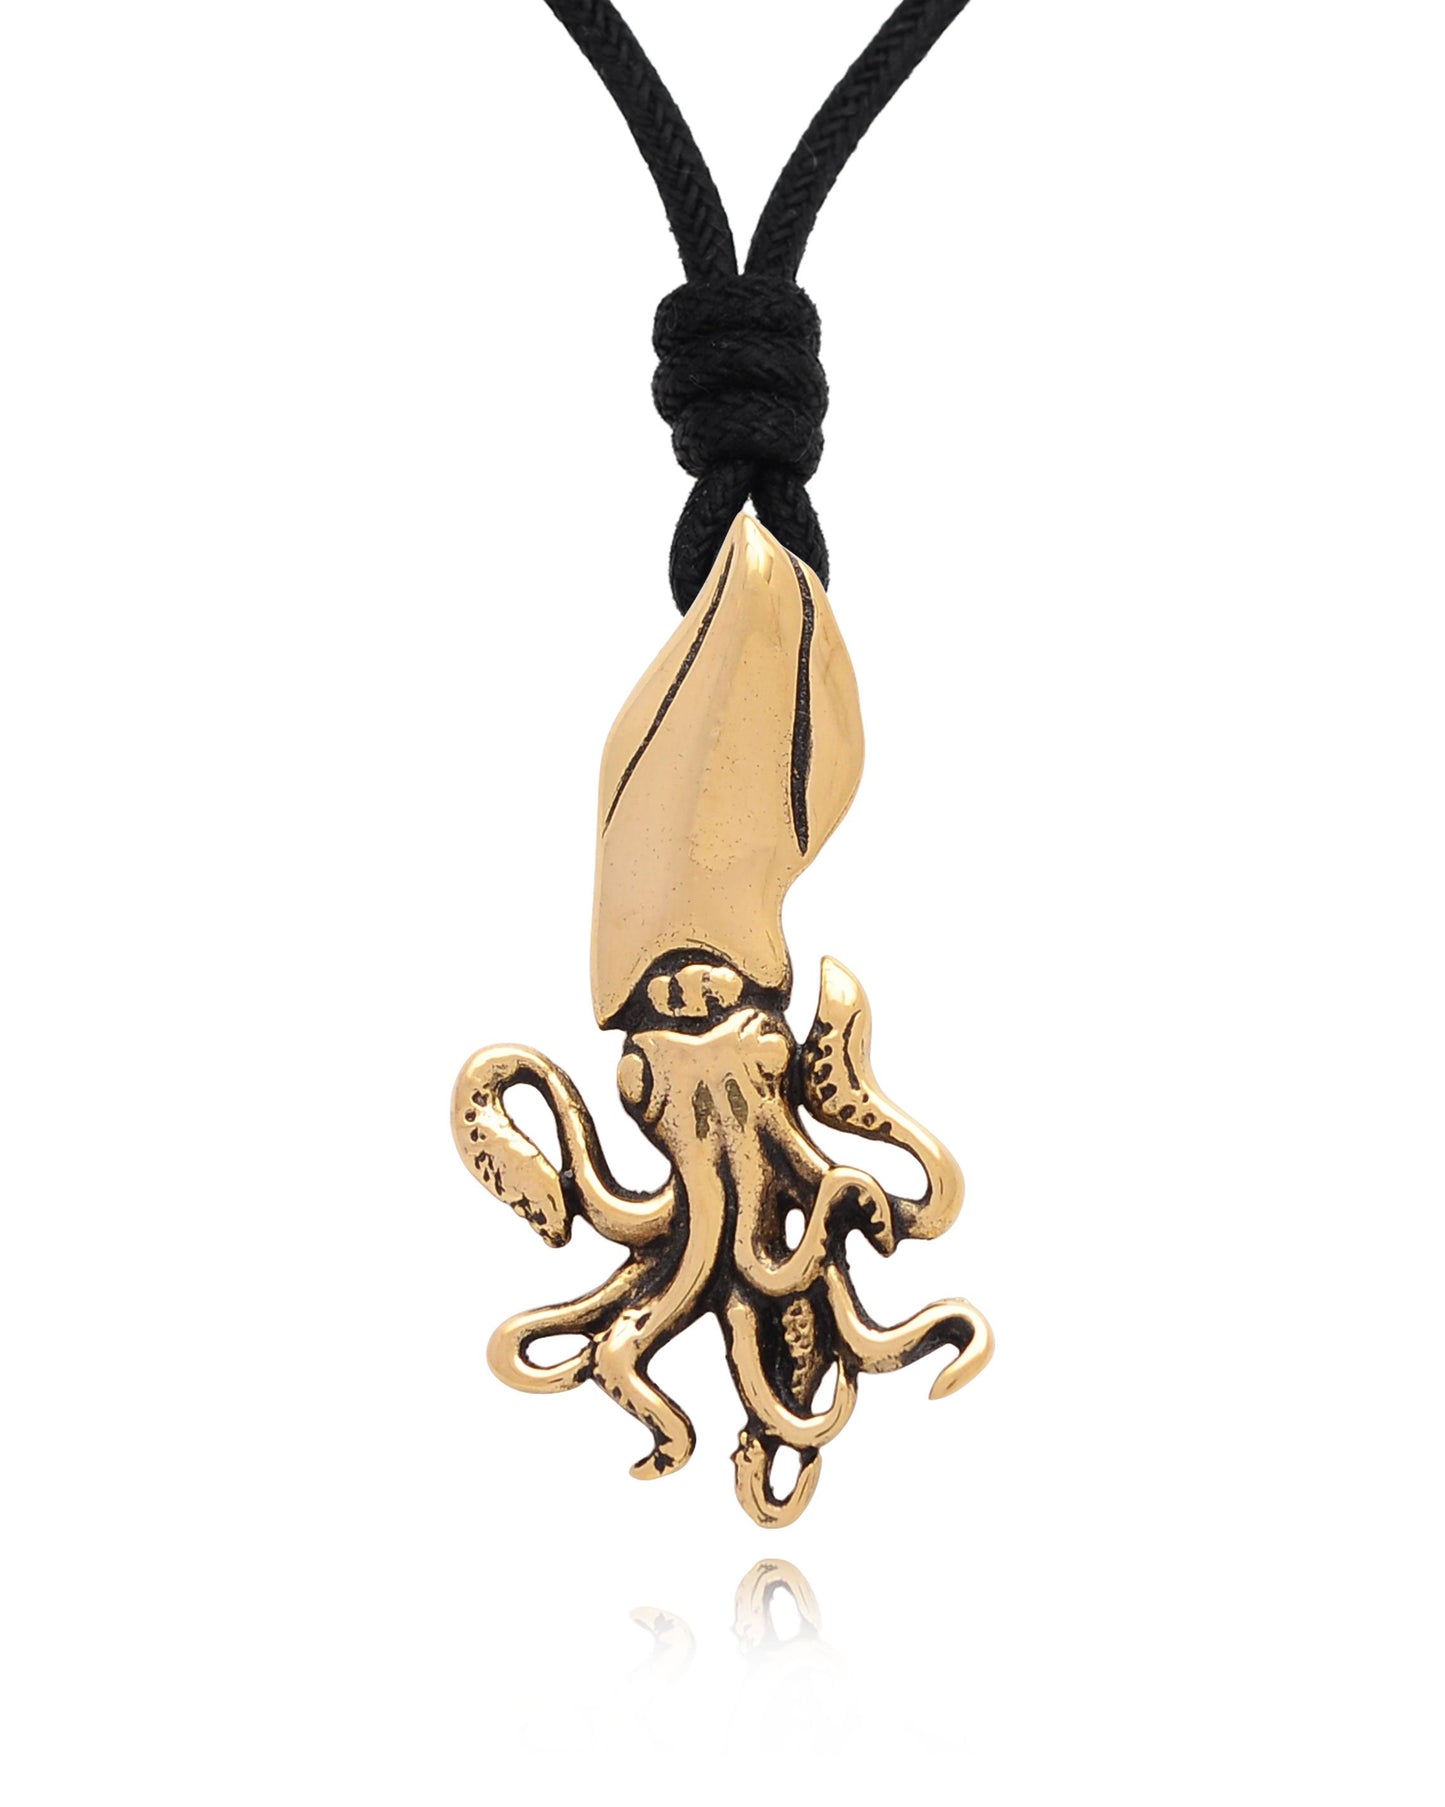 Squid Sea Life Silver Pewter Gold Brass Charm Necklace Pendent Jewelry